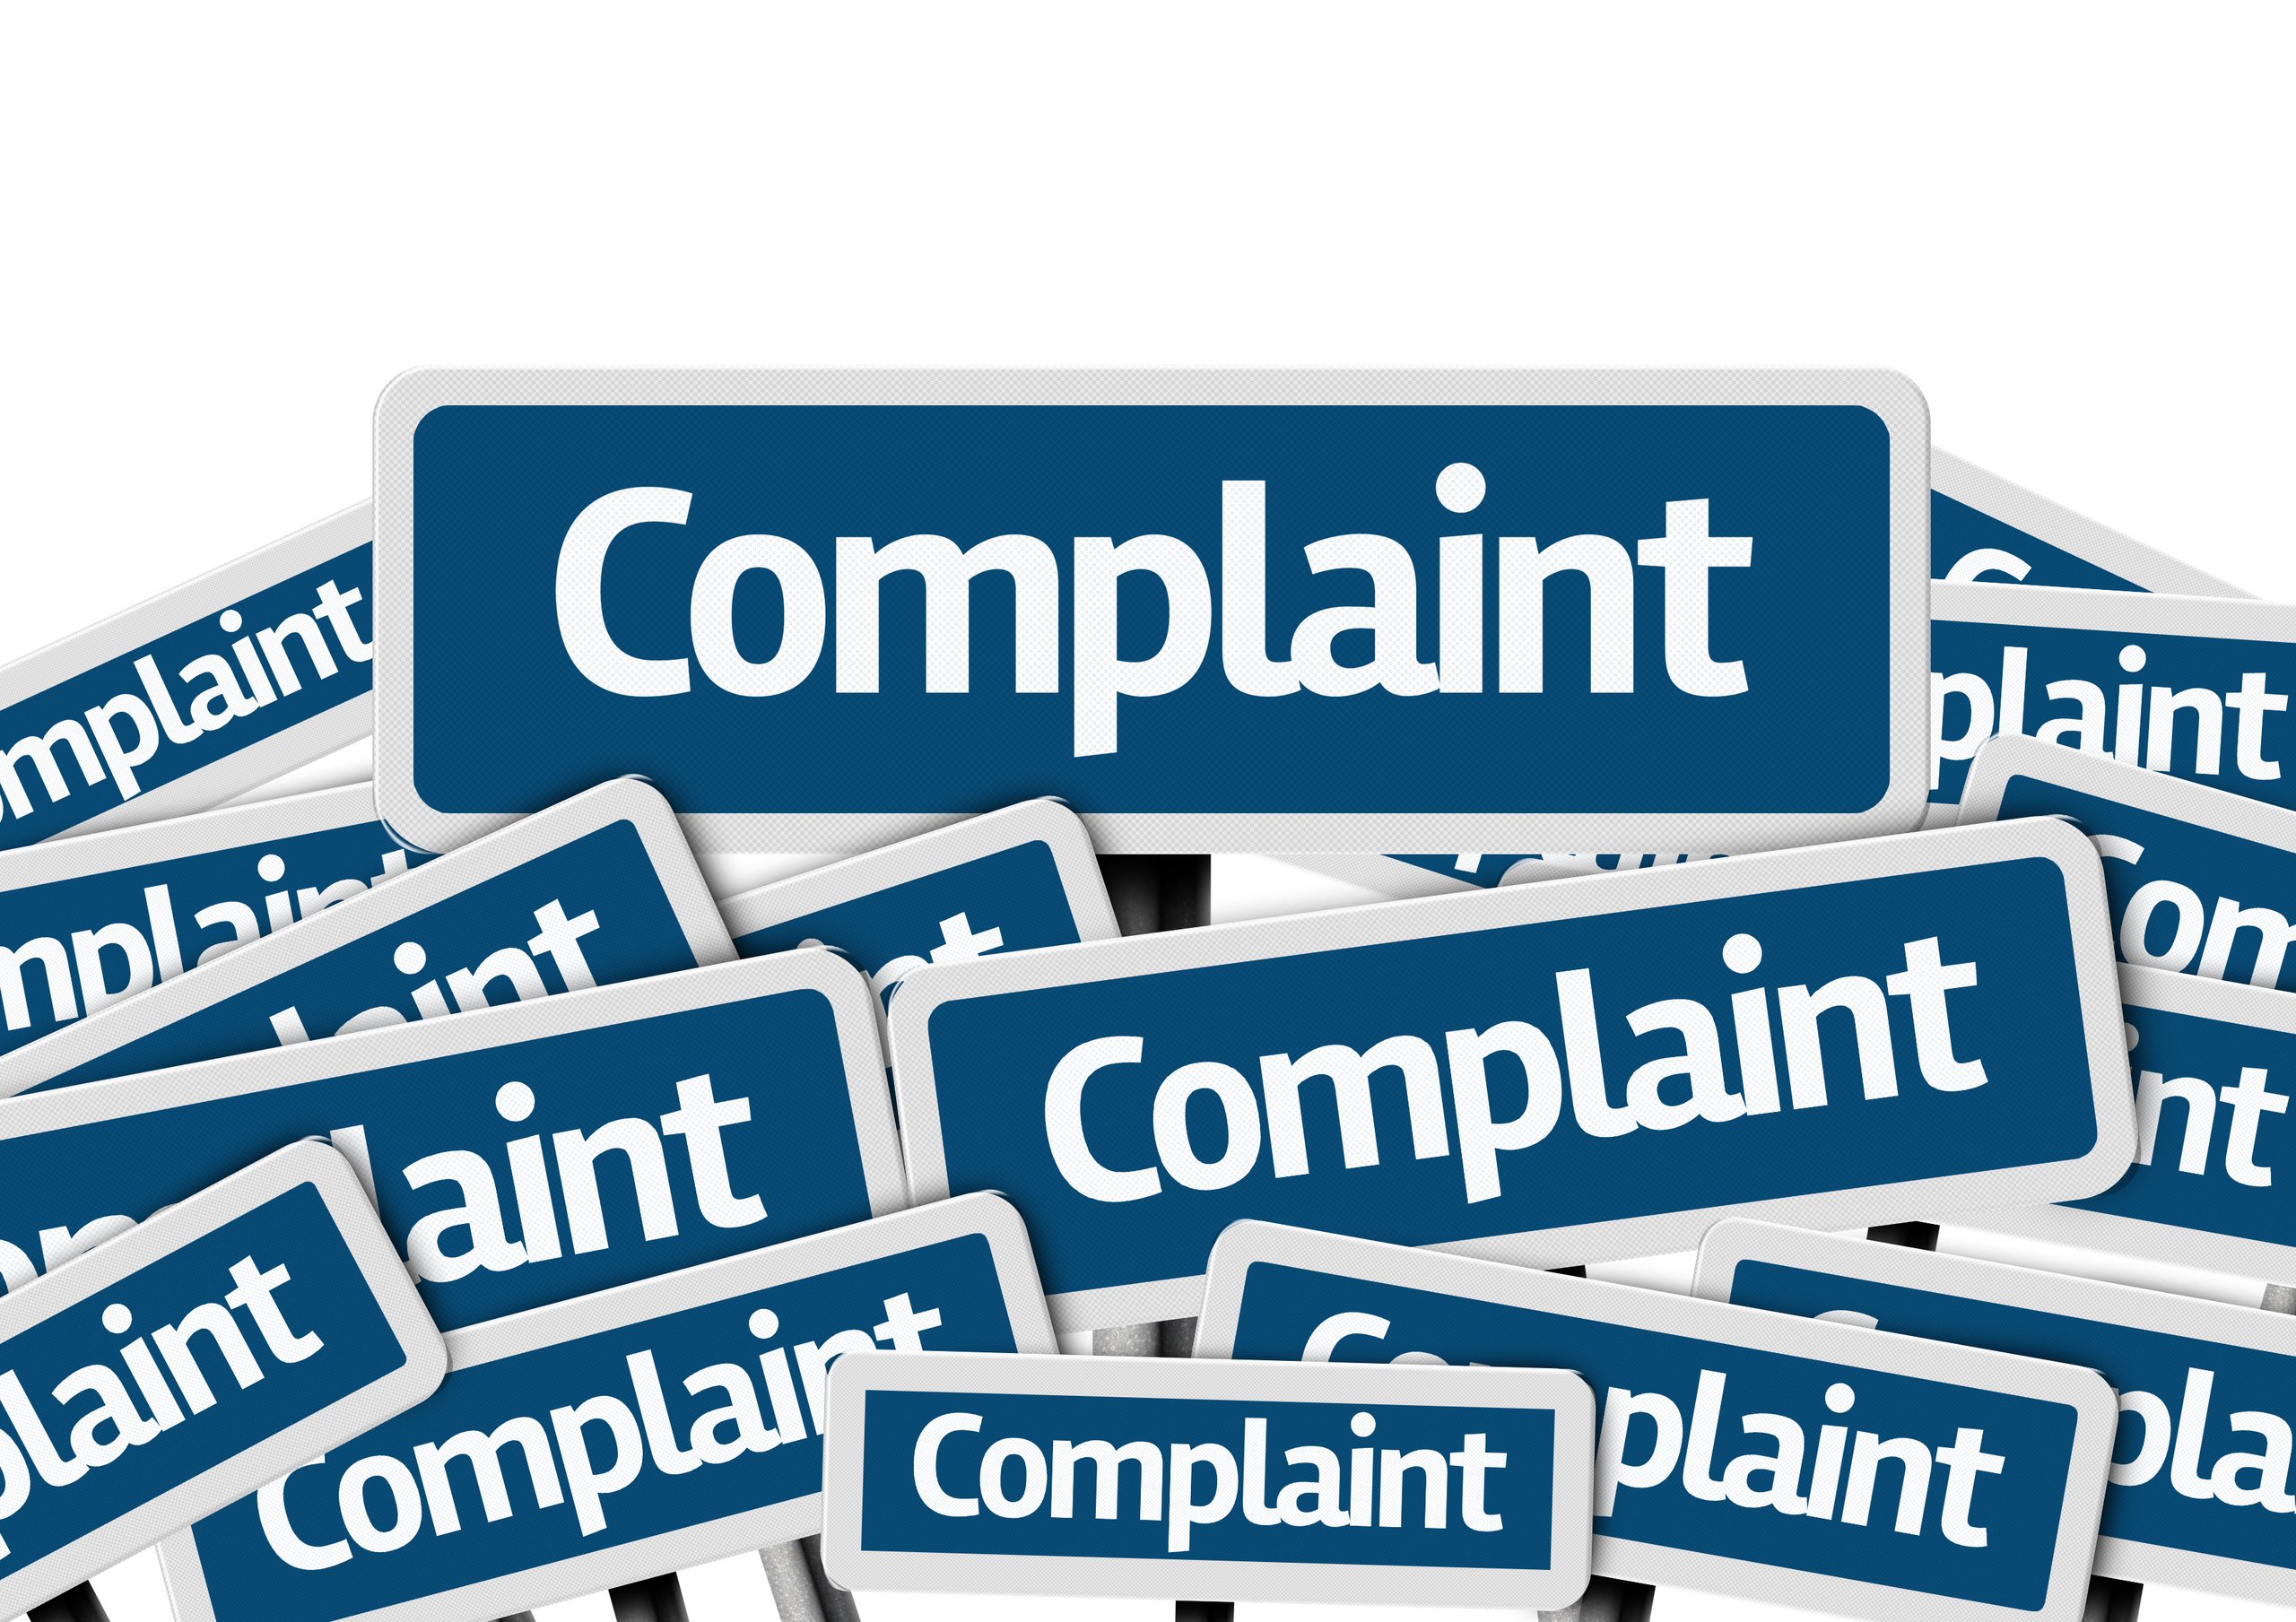 Managing Complaints: The Role of the Three Lines of Defense